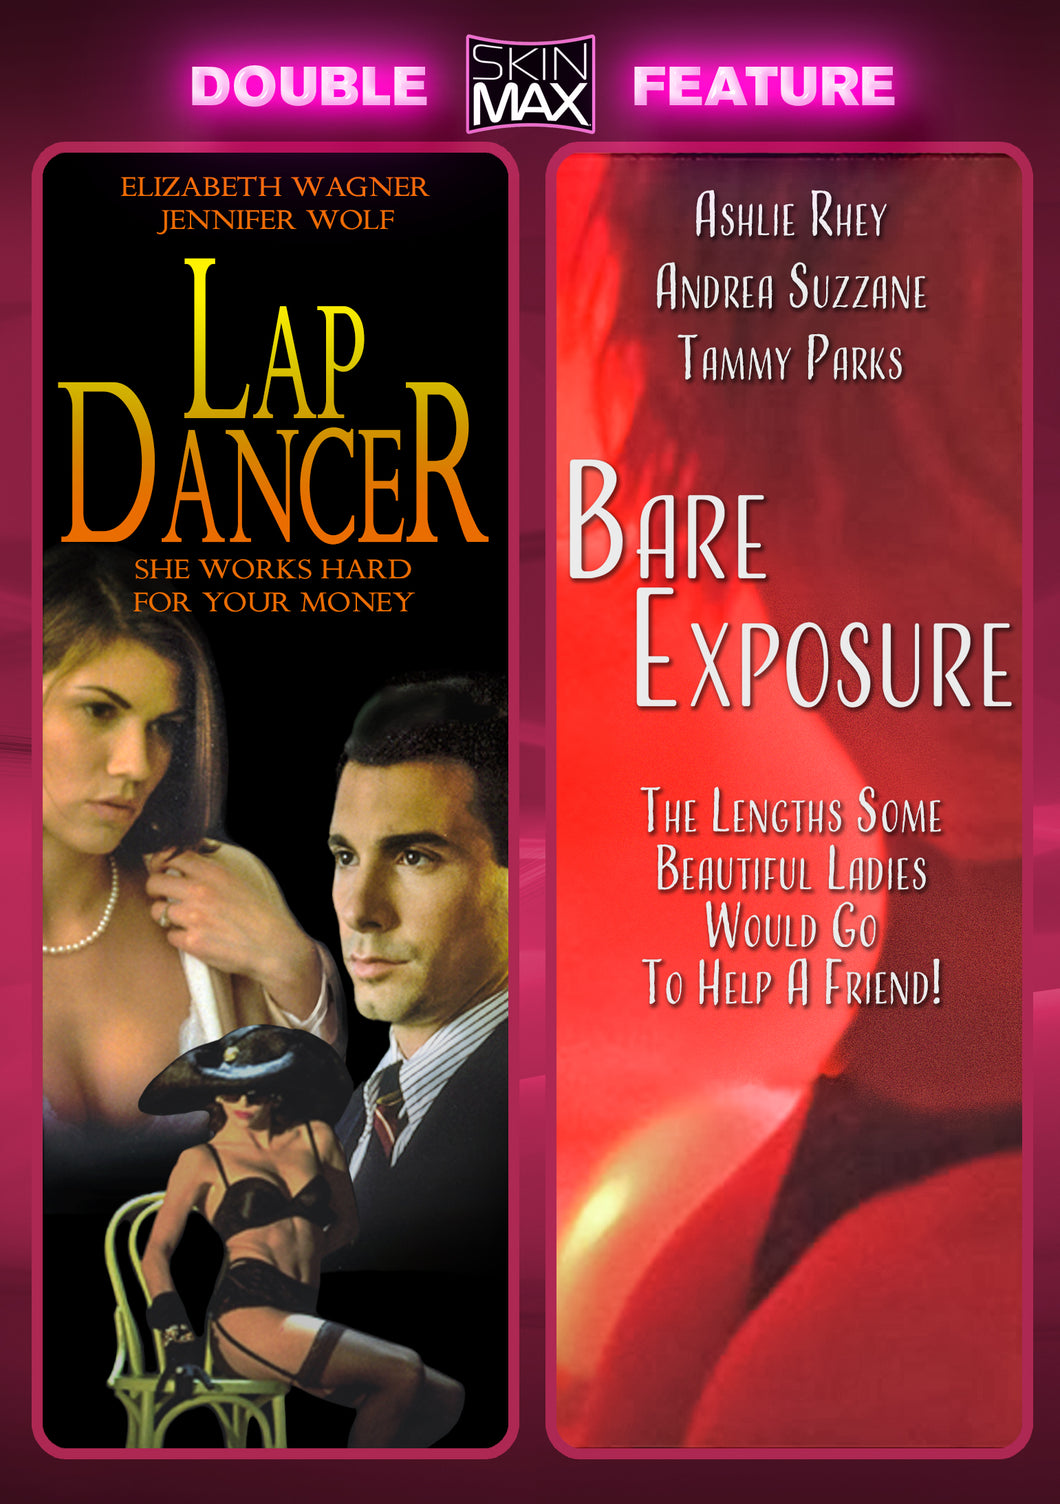 Lap Dancer + Bare Exposure [SkinMax Double Feature] (DVD)